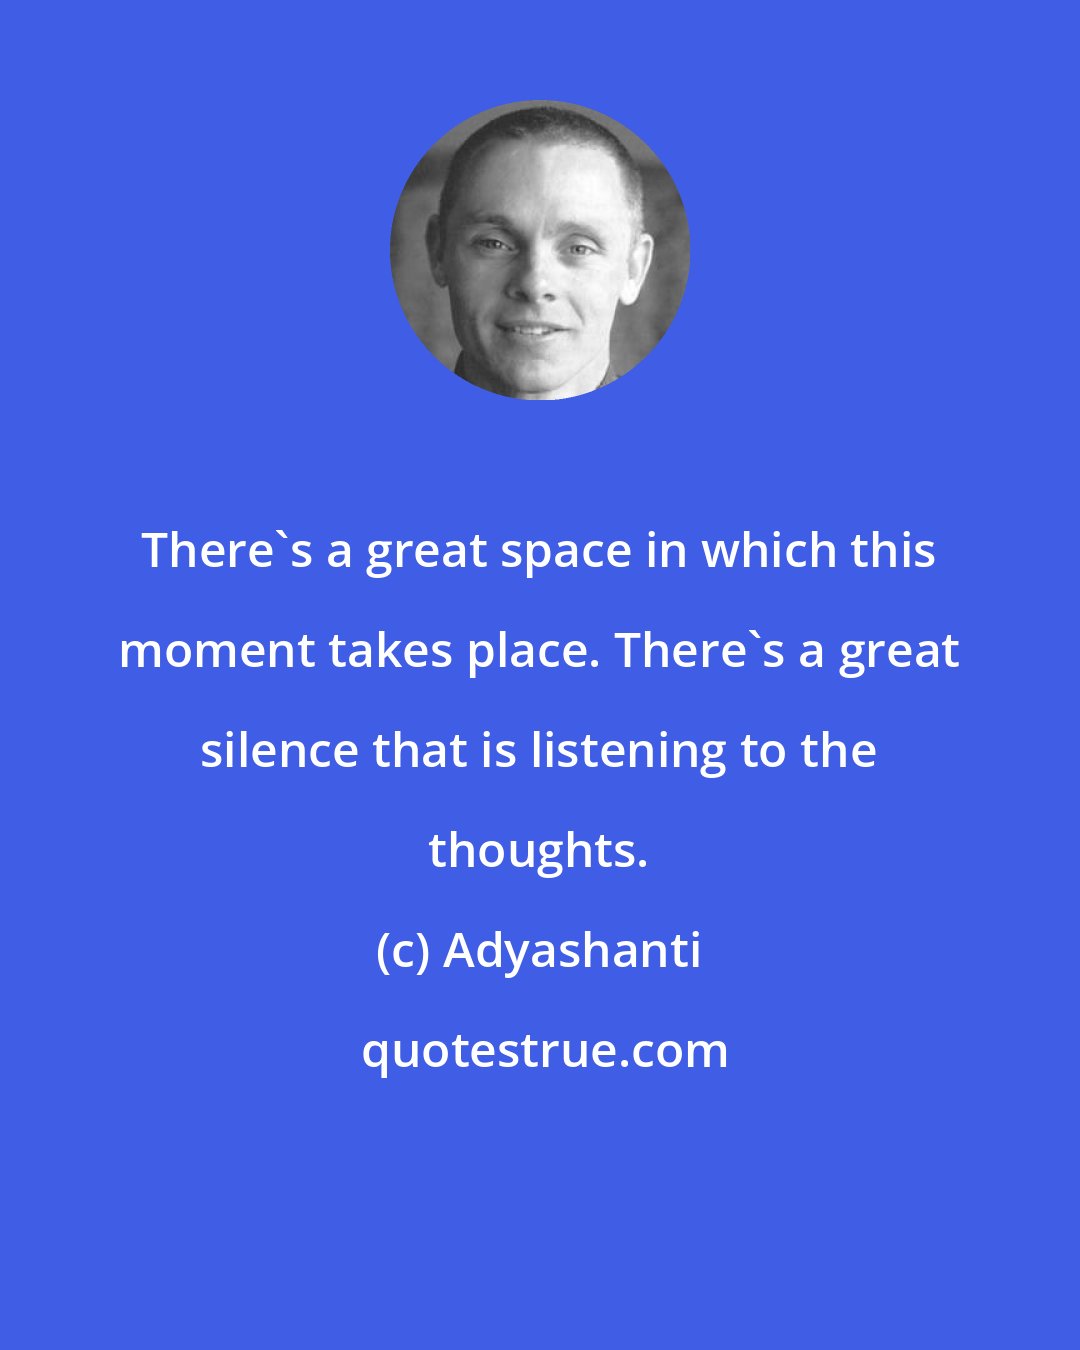 Adyashanti: There's a great space in which this moment takes place. There's a great silence that is listening to the thoughts.